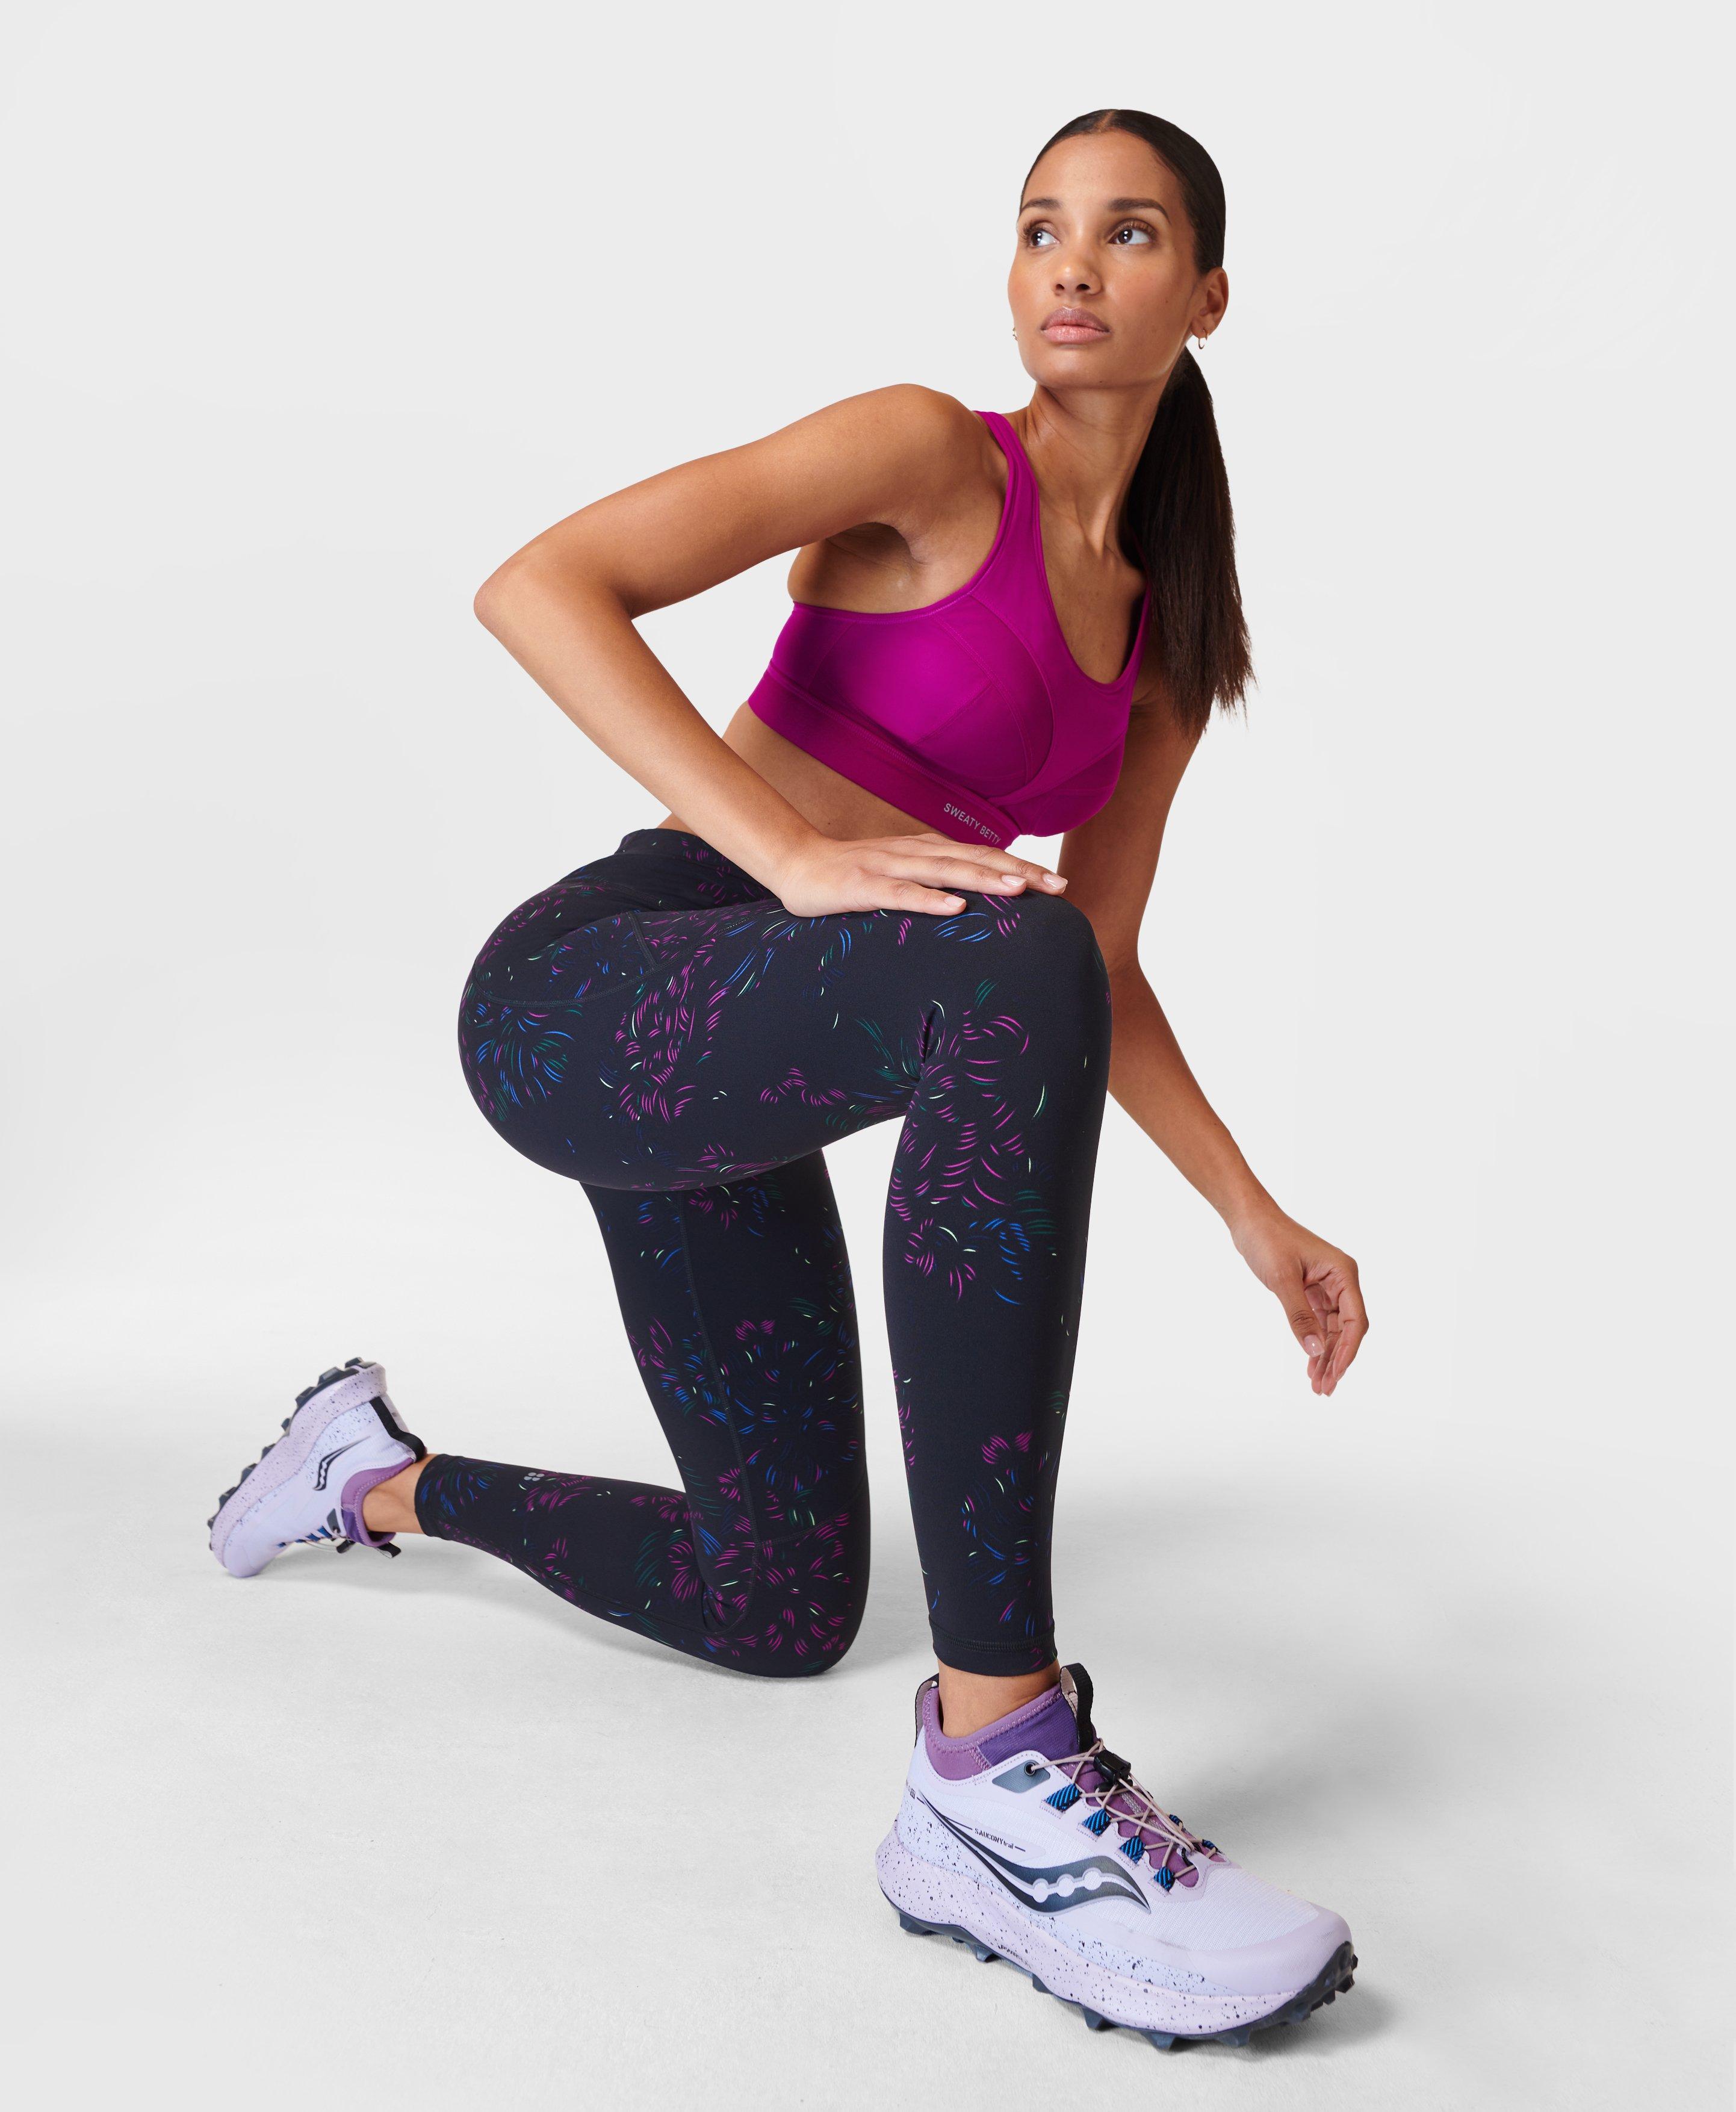 Explore the Hottest Women's Gym Leggings This Black Friday